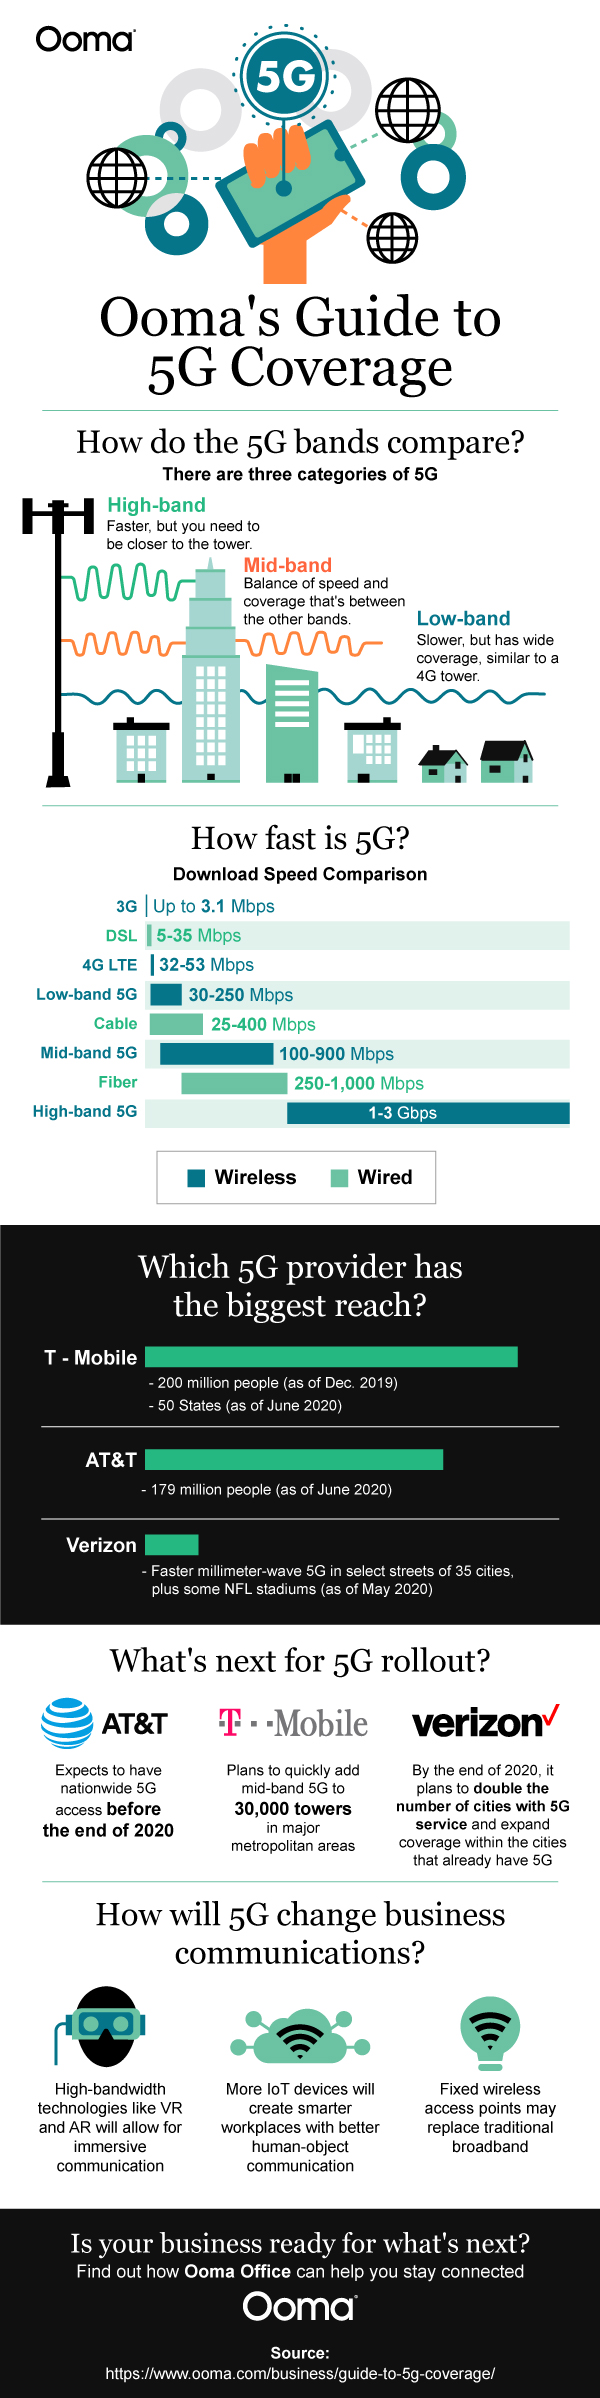 Ooma’s Guide to 5G Coverage